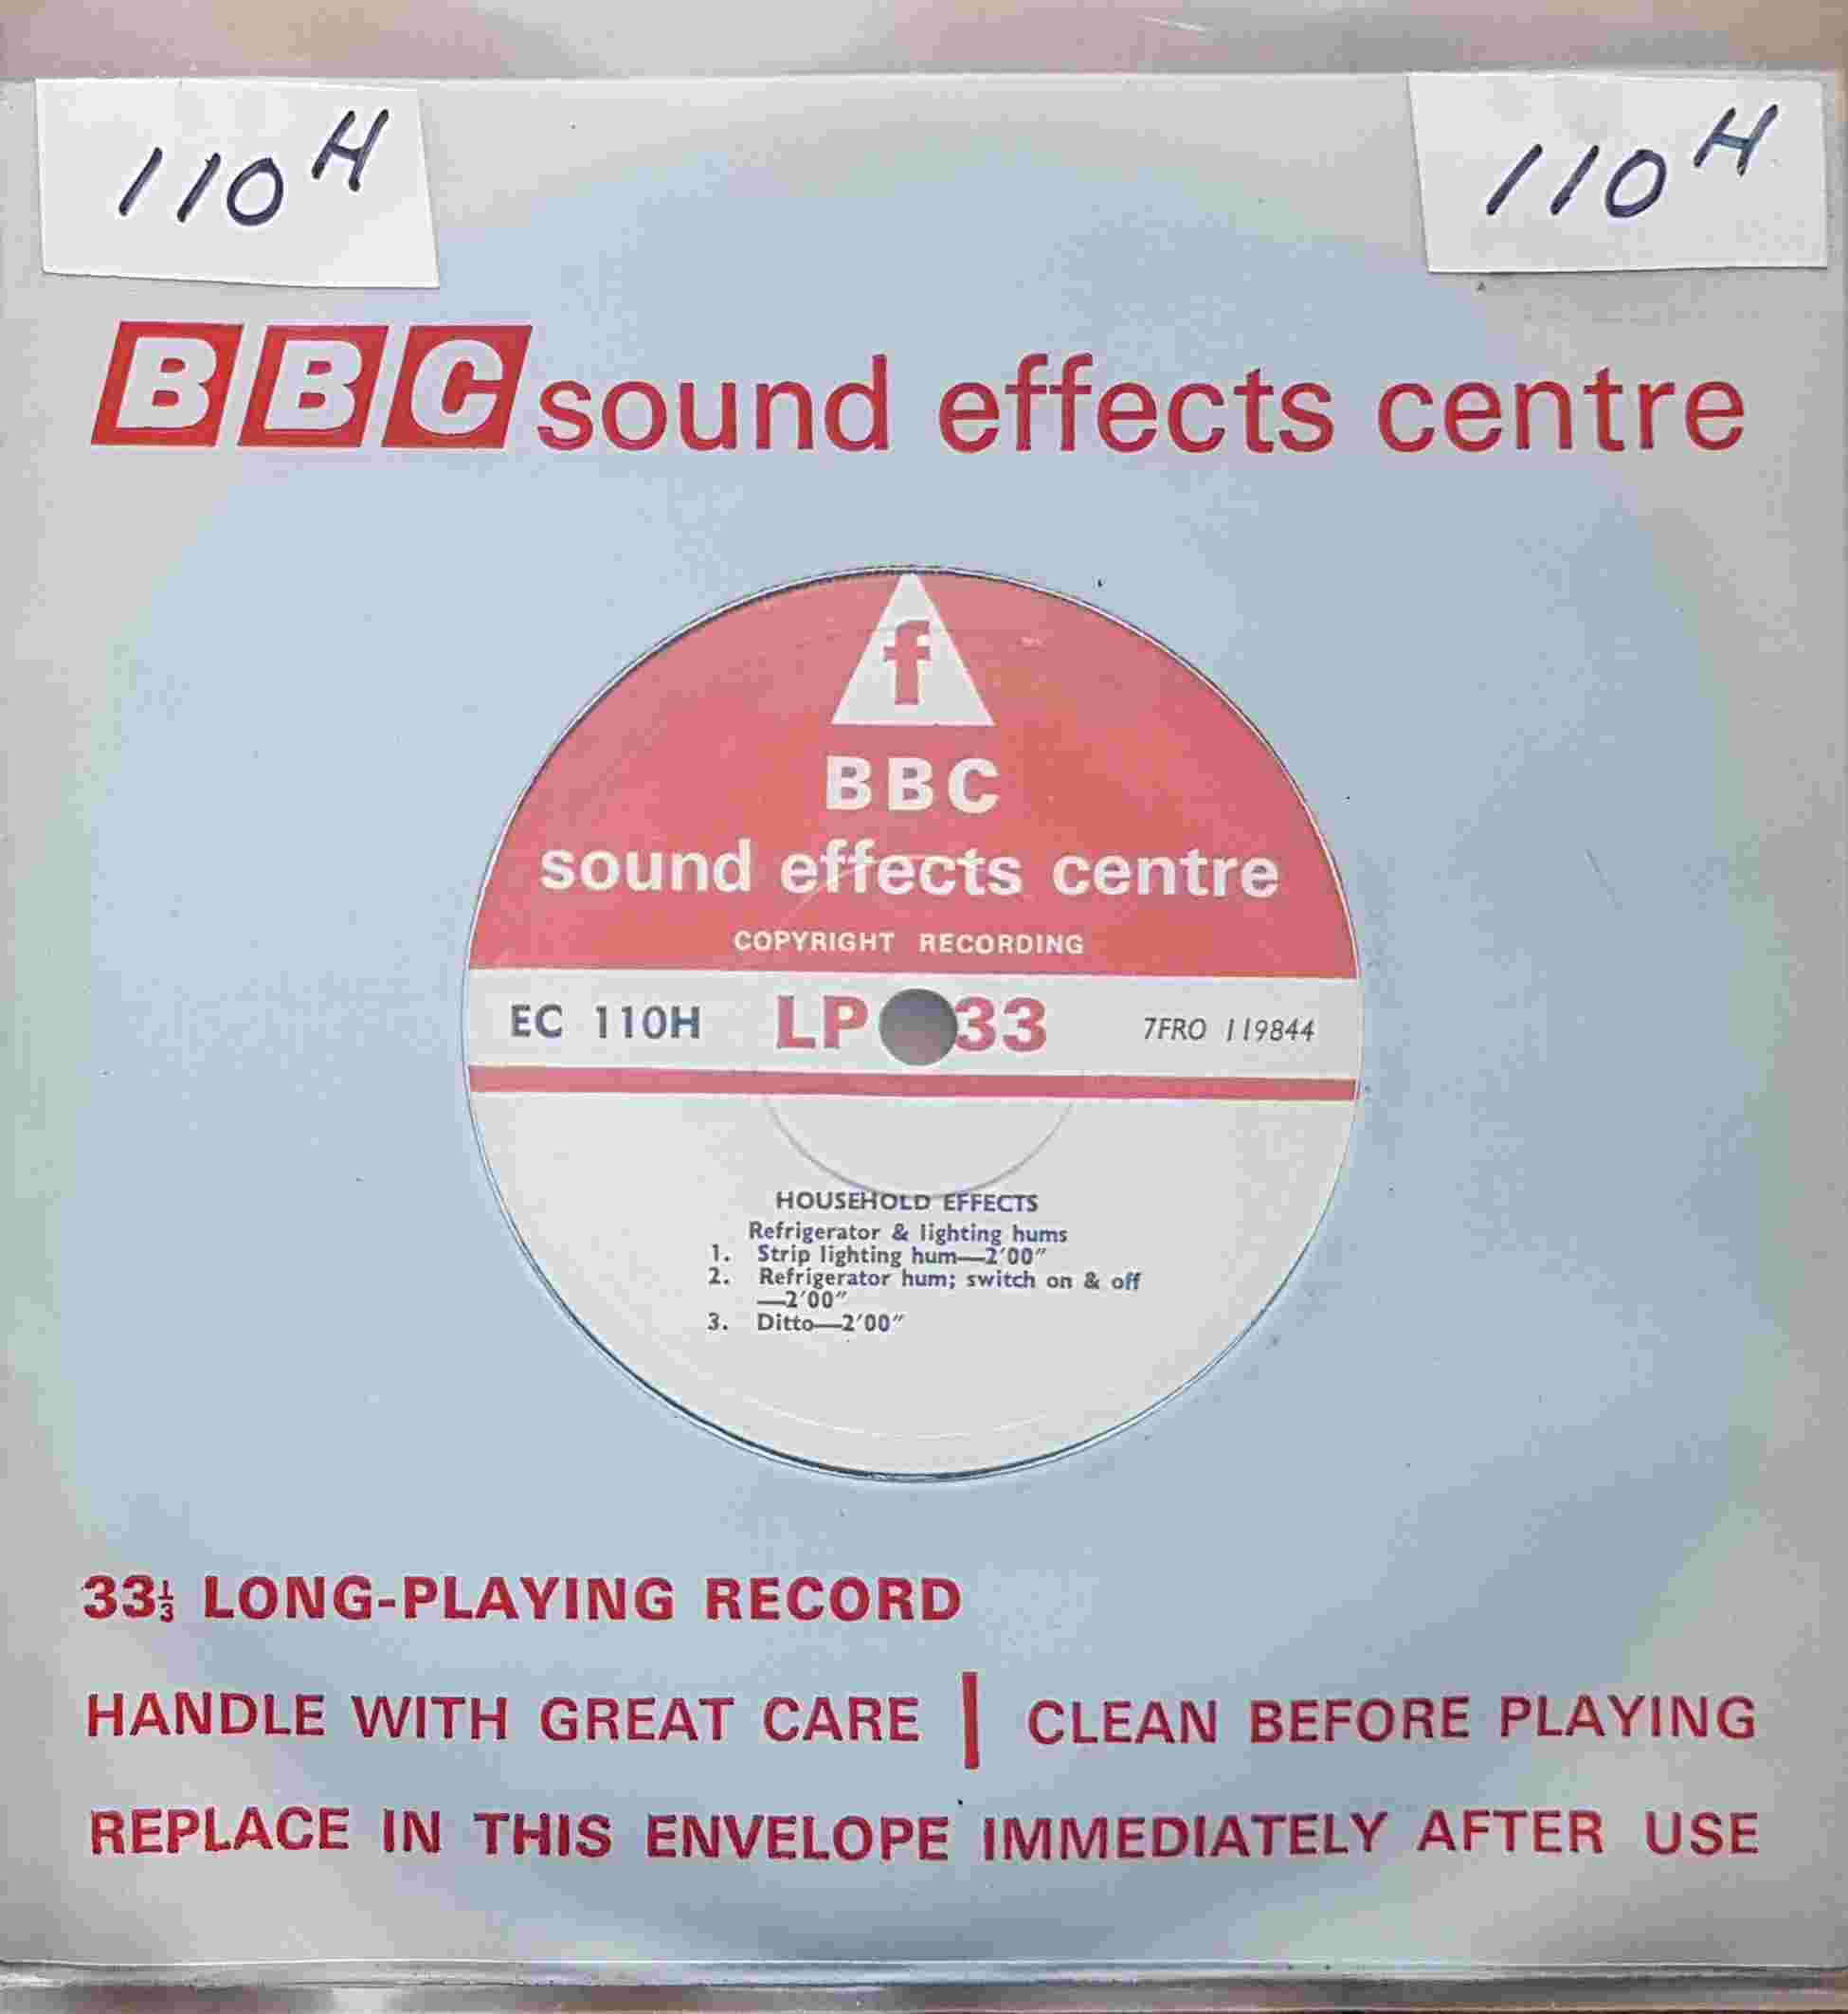 Picture of EC 110H Household effects - Refrigerator & lighting hums by artist Not registered from the BBC singles - Records and Tapes library